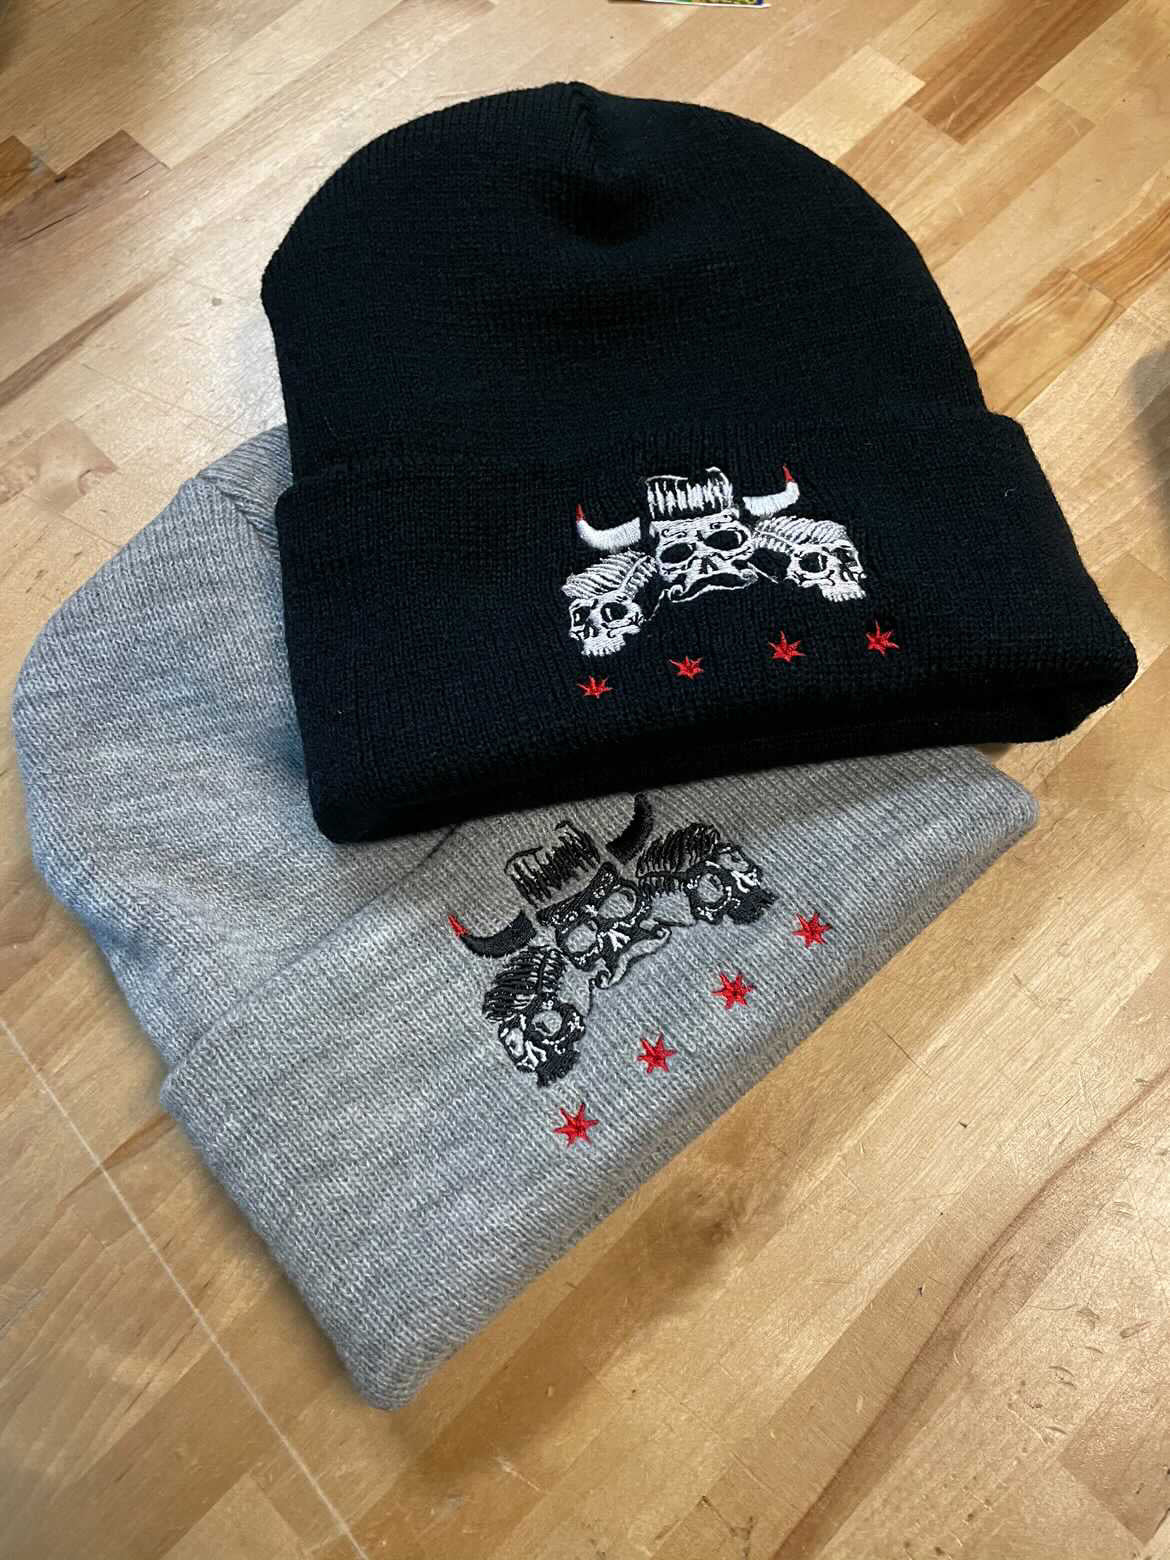 The Rockstar Bully Beanie offering a unique look great for any outfit.  Add to cart